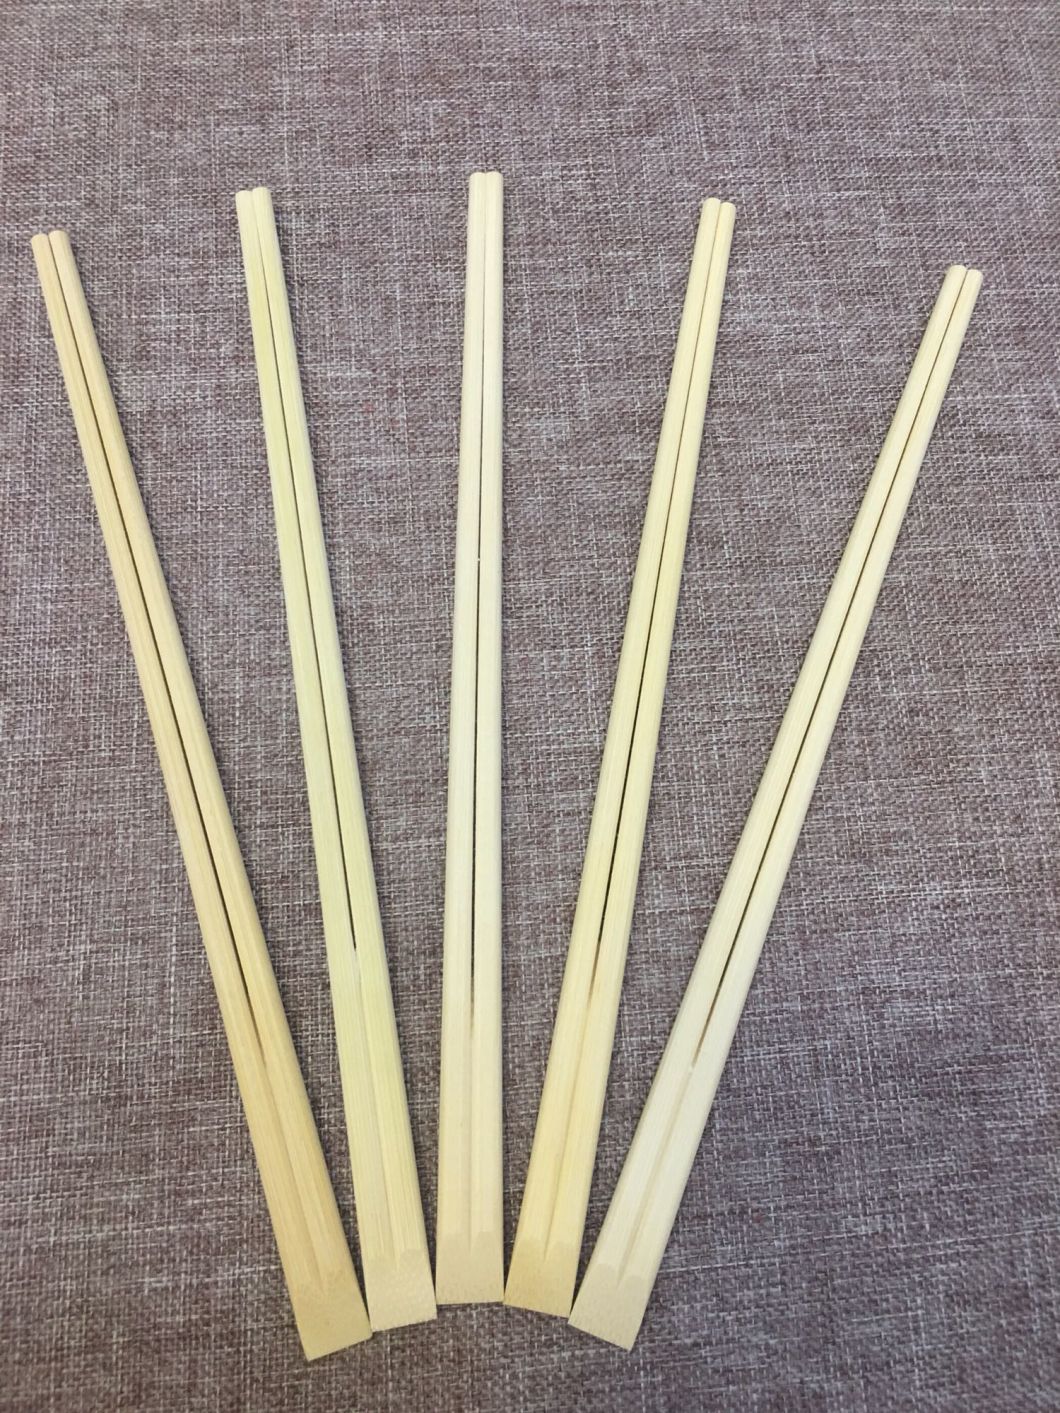 Chinese Tableware Twins 2 in 1 Disposable Bamboo Chopsticks